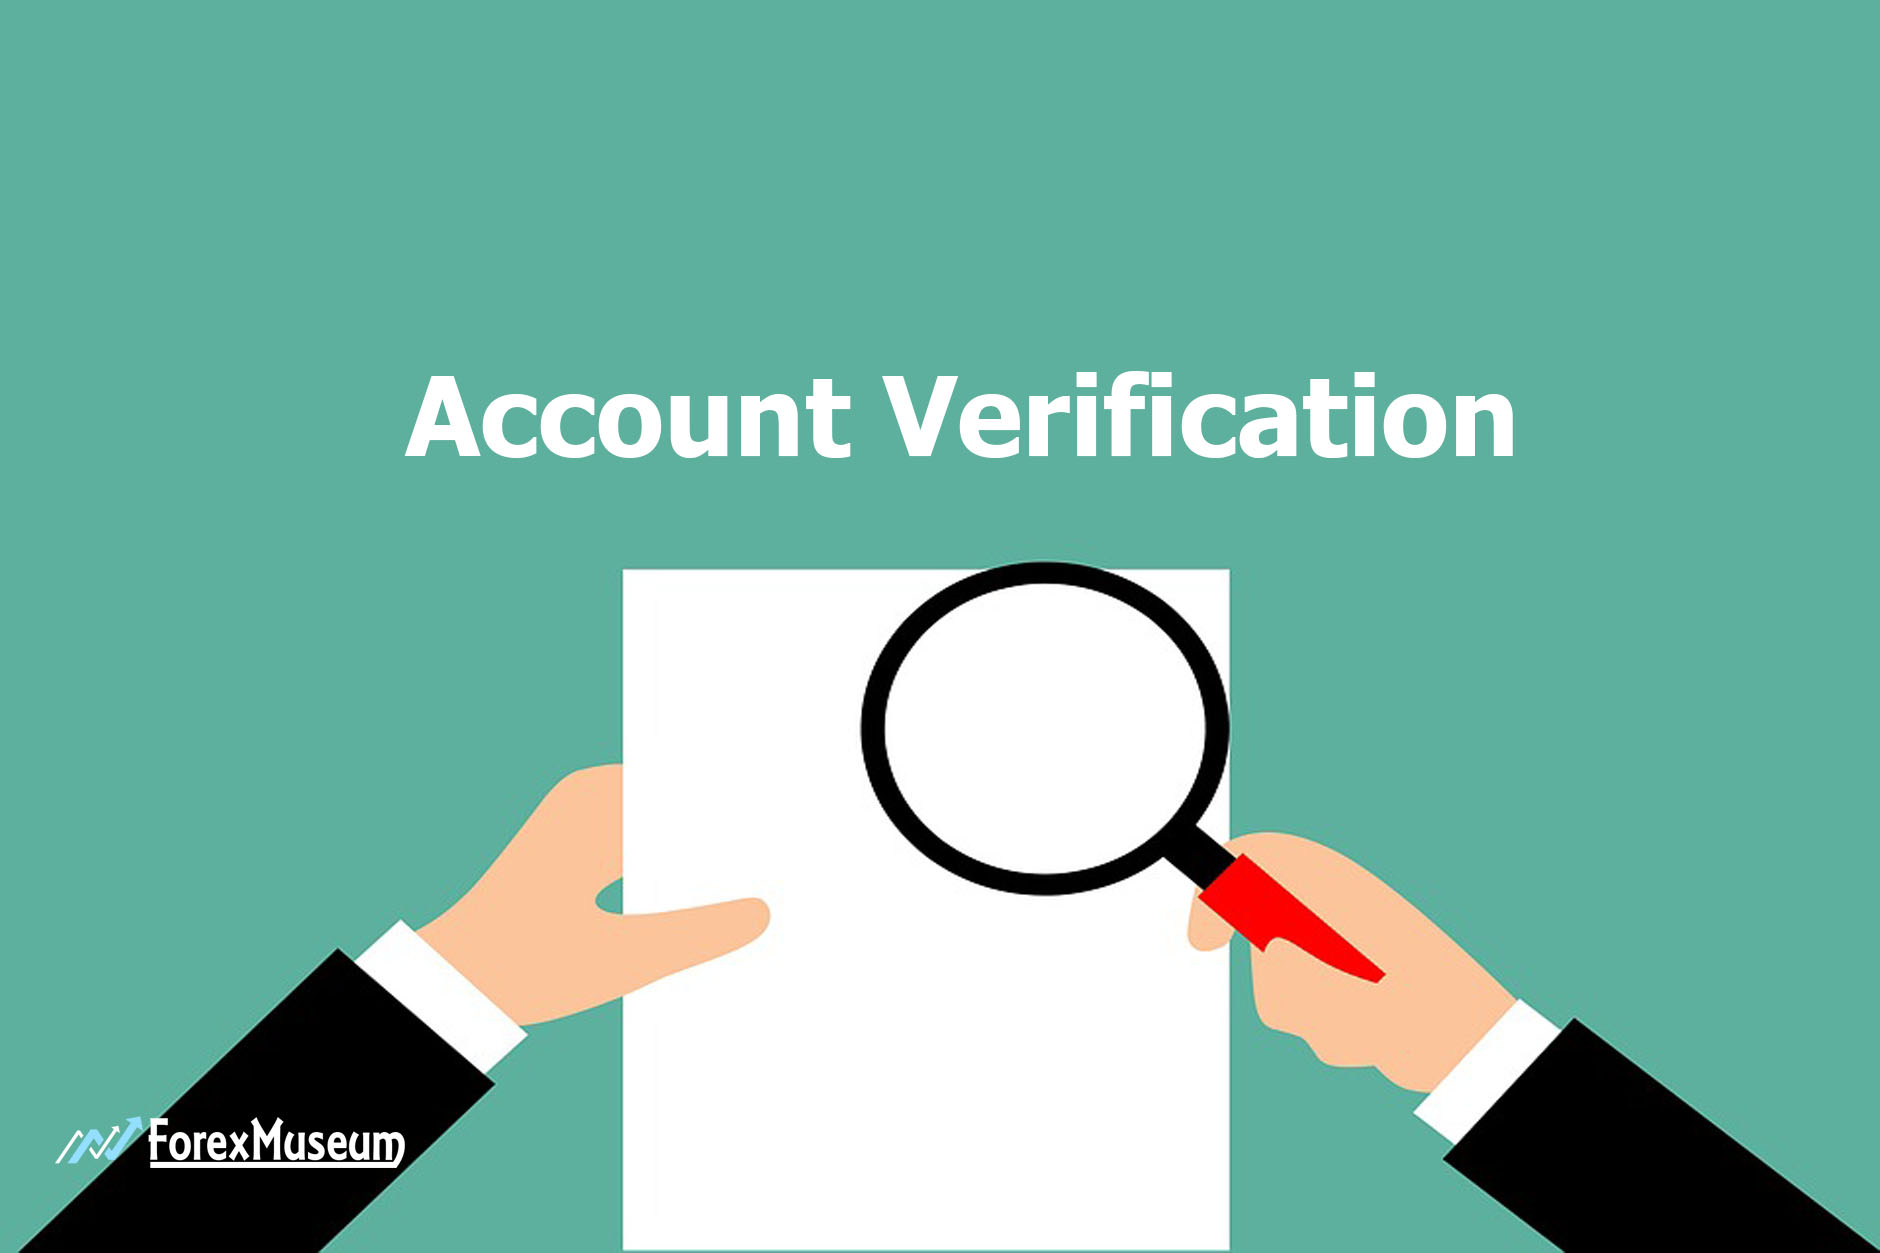  What documents do we need to verify